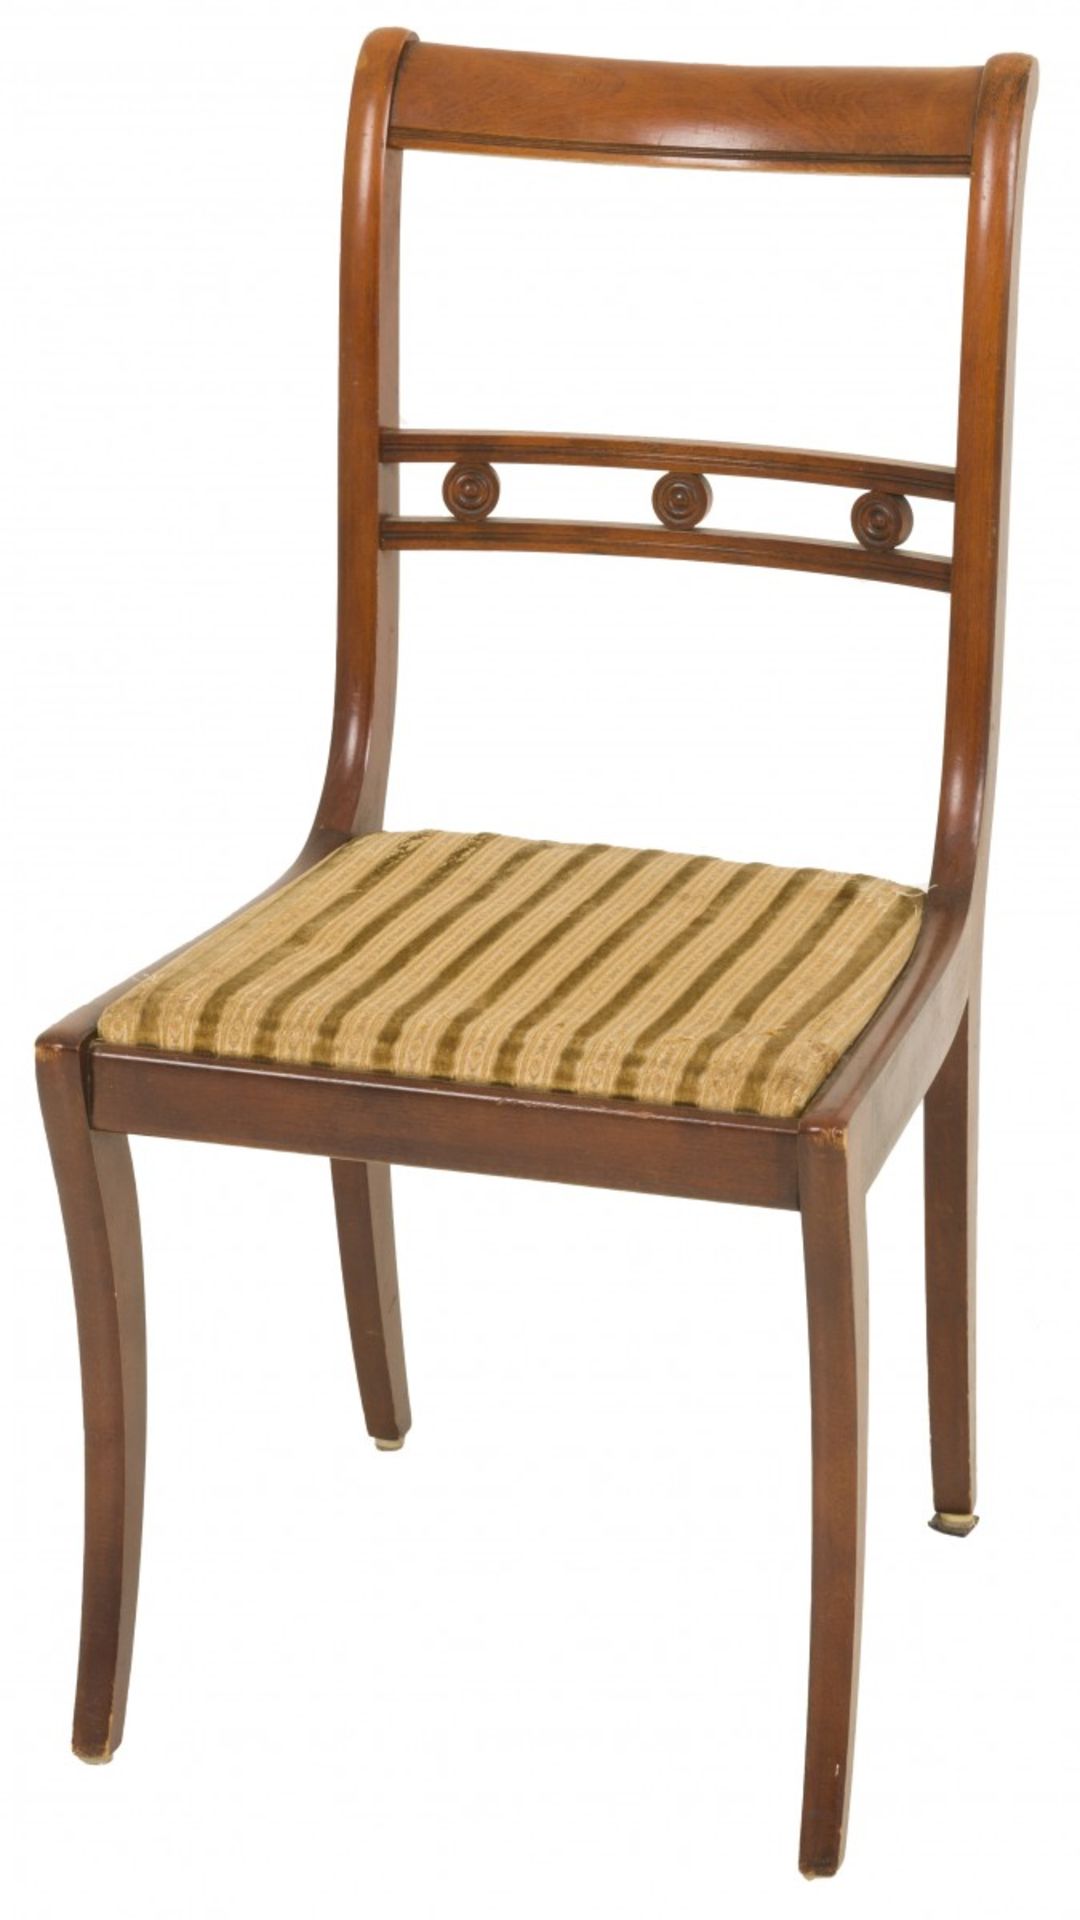 A set of (4) Regency-style mahogany dining chairs, 20th century. - Image 2 of 2